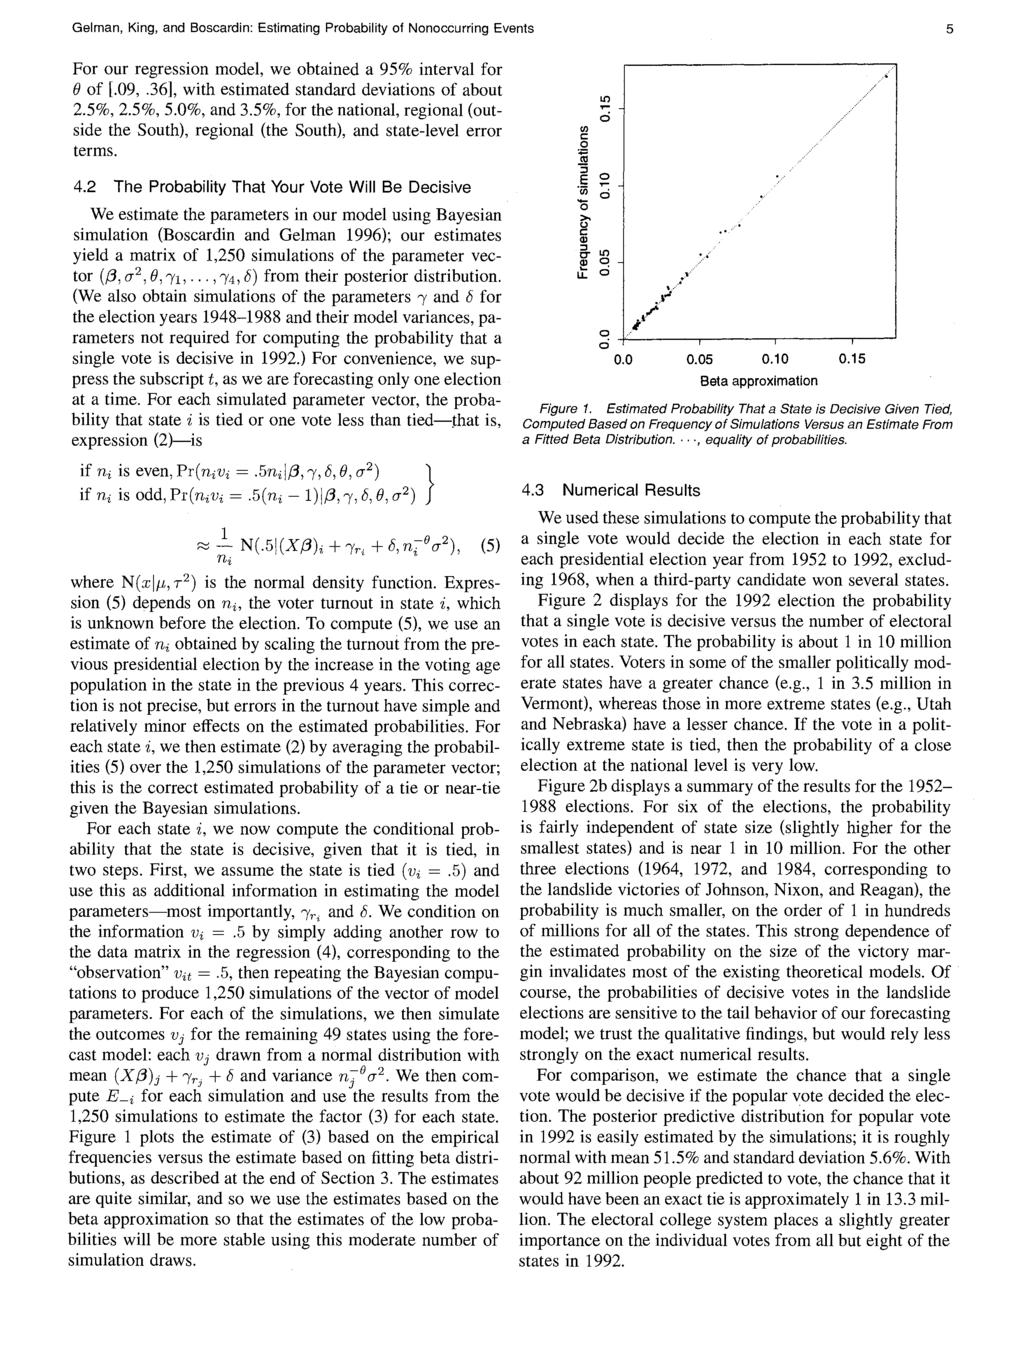 Gelman, King, and Boscardin: Estimating Probability of Nonoccurring Events For our regression model, we obtained a 95% interval for 0 of [.09,.36], with estimated standard deviations of about 2.5%, 2.